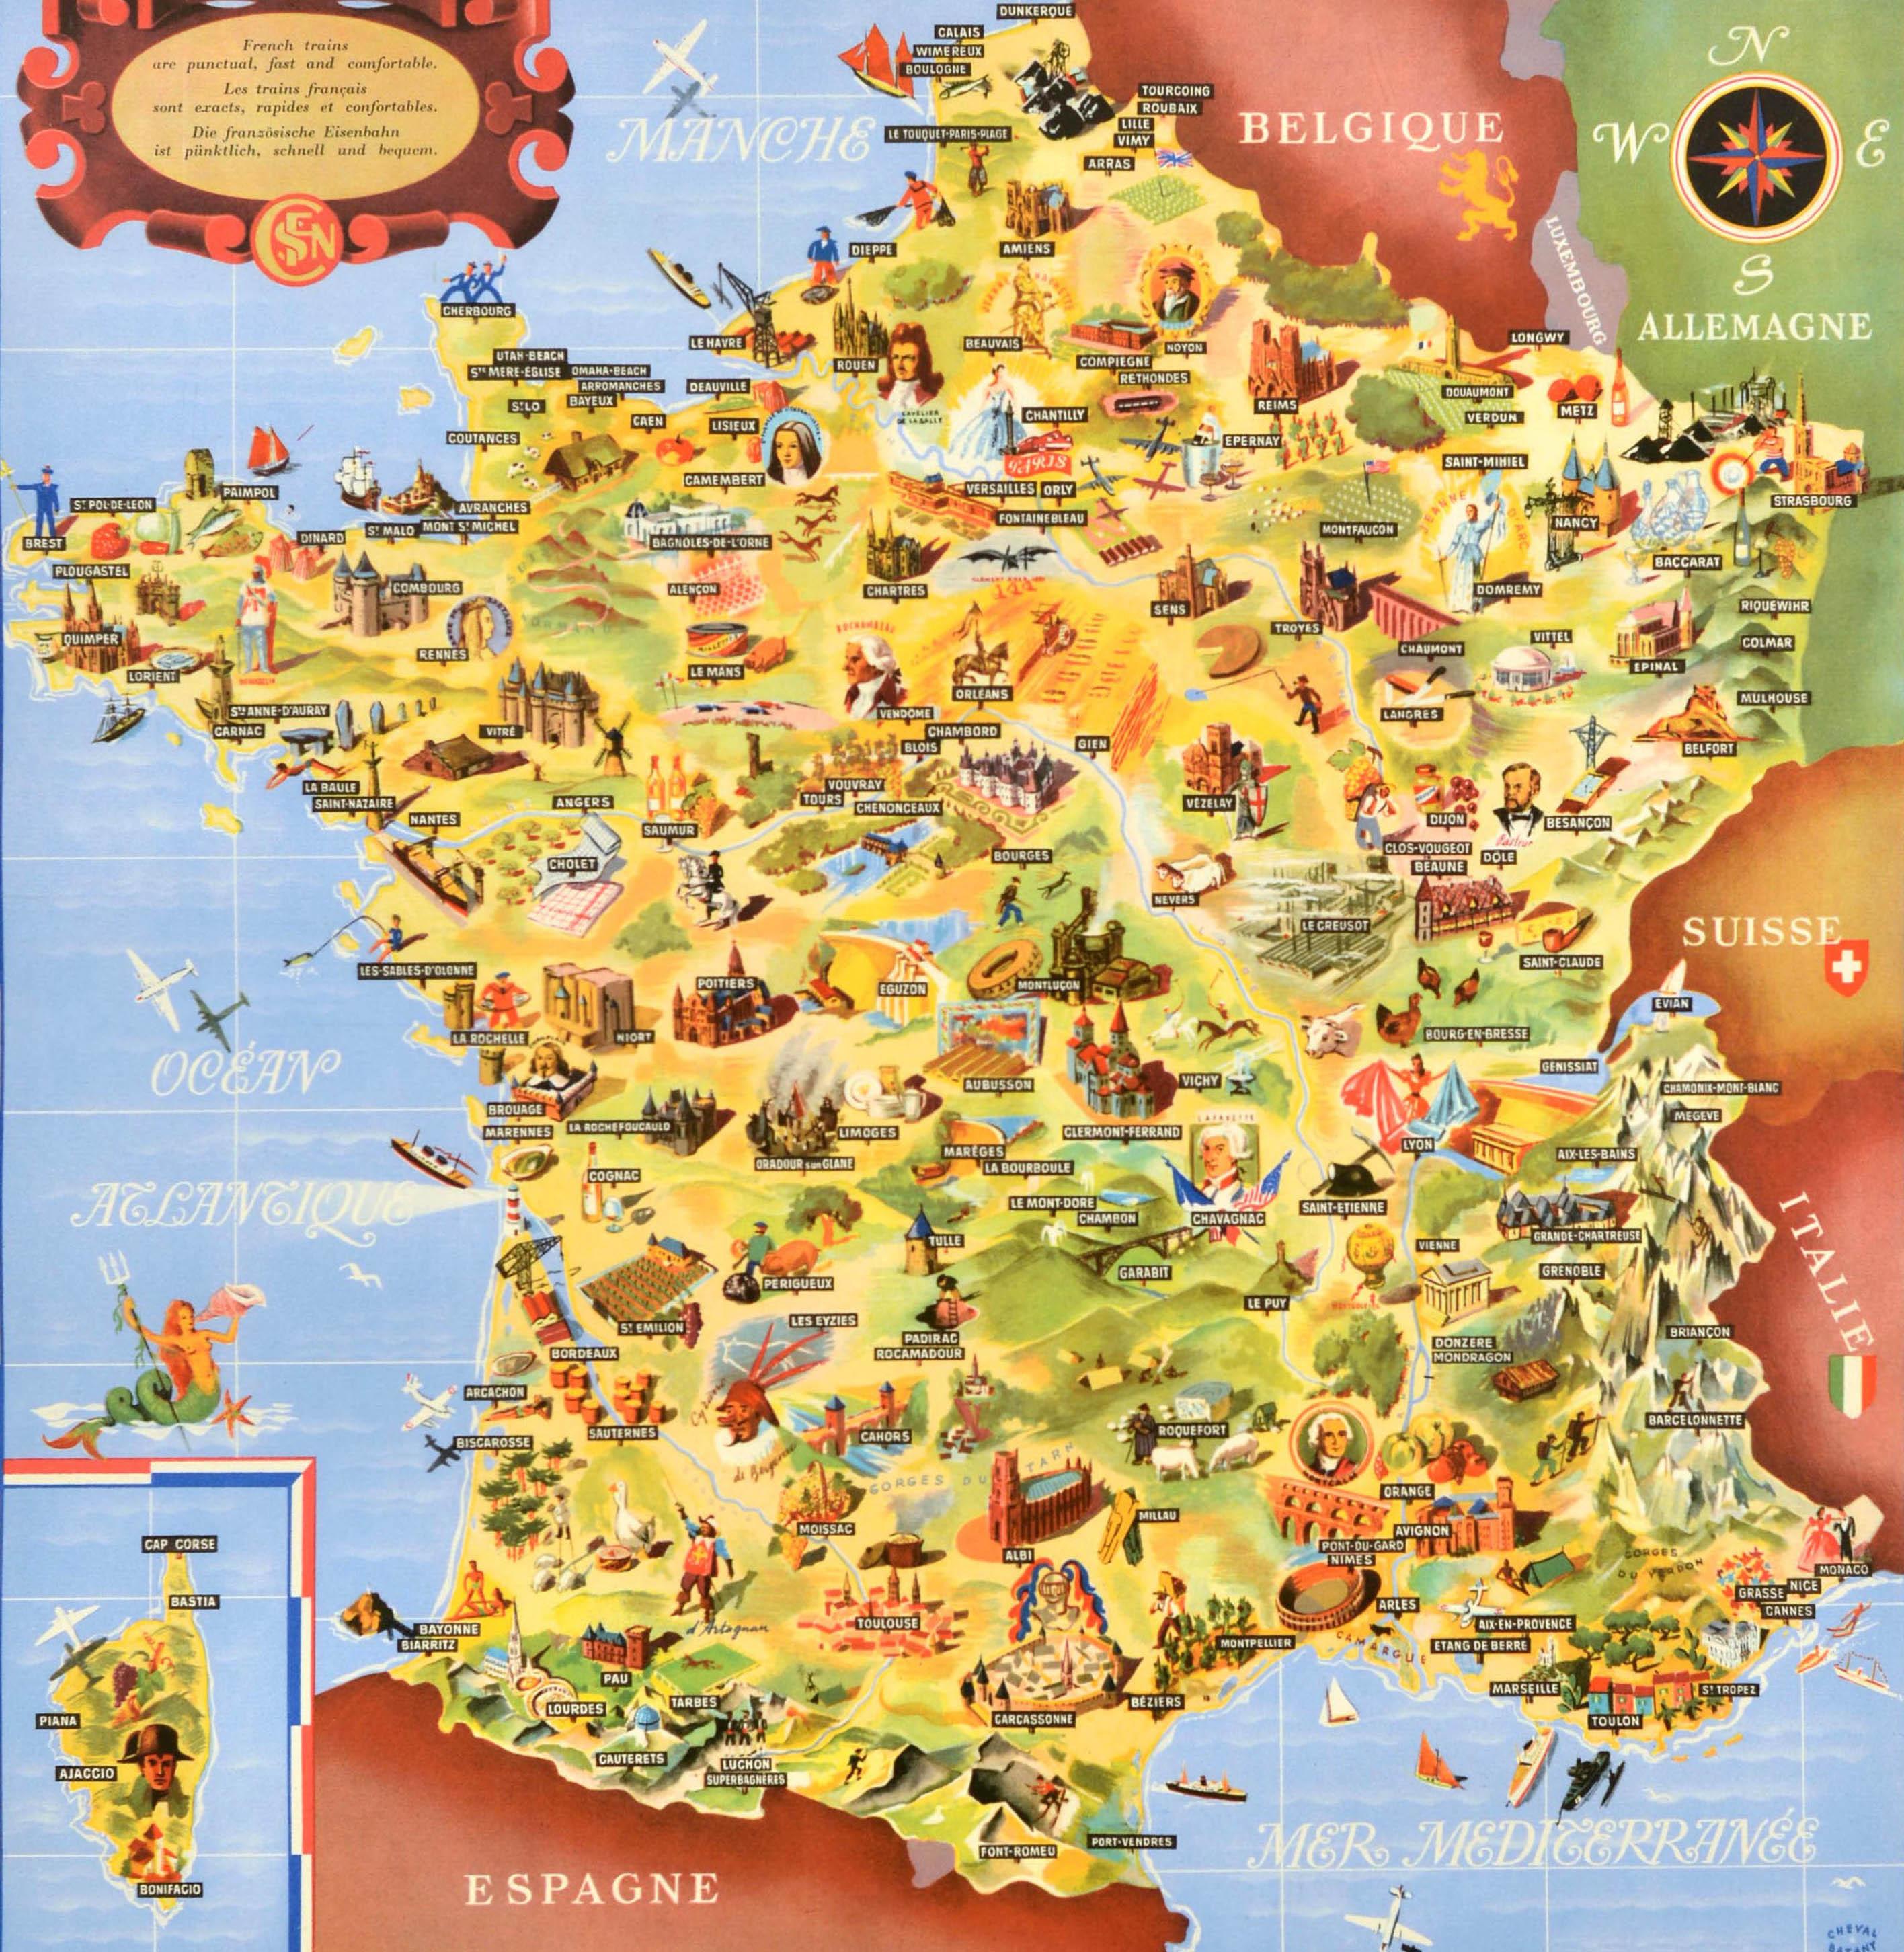 Original vintage rail travel map poster - France Societe Nationale des Chemins de Fer Francais - featuring a colourful illustrated map by Jean Cheval and Alex Batany (as Cheval-Batany) of places of interest and landmarks including ancient and